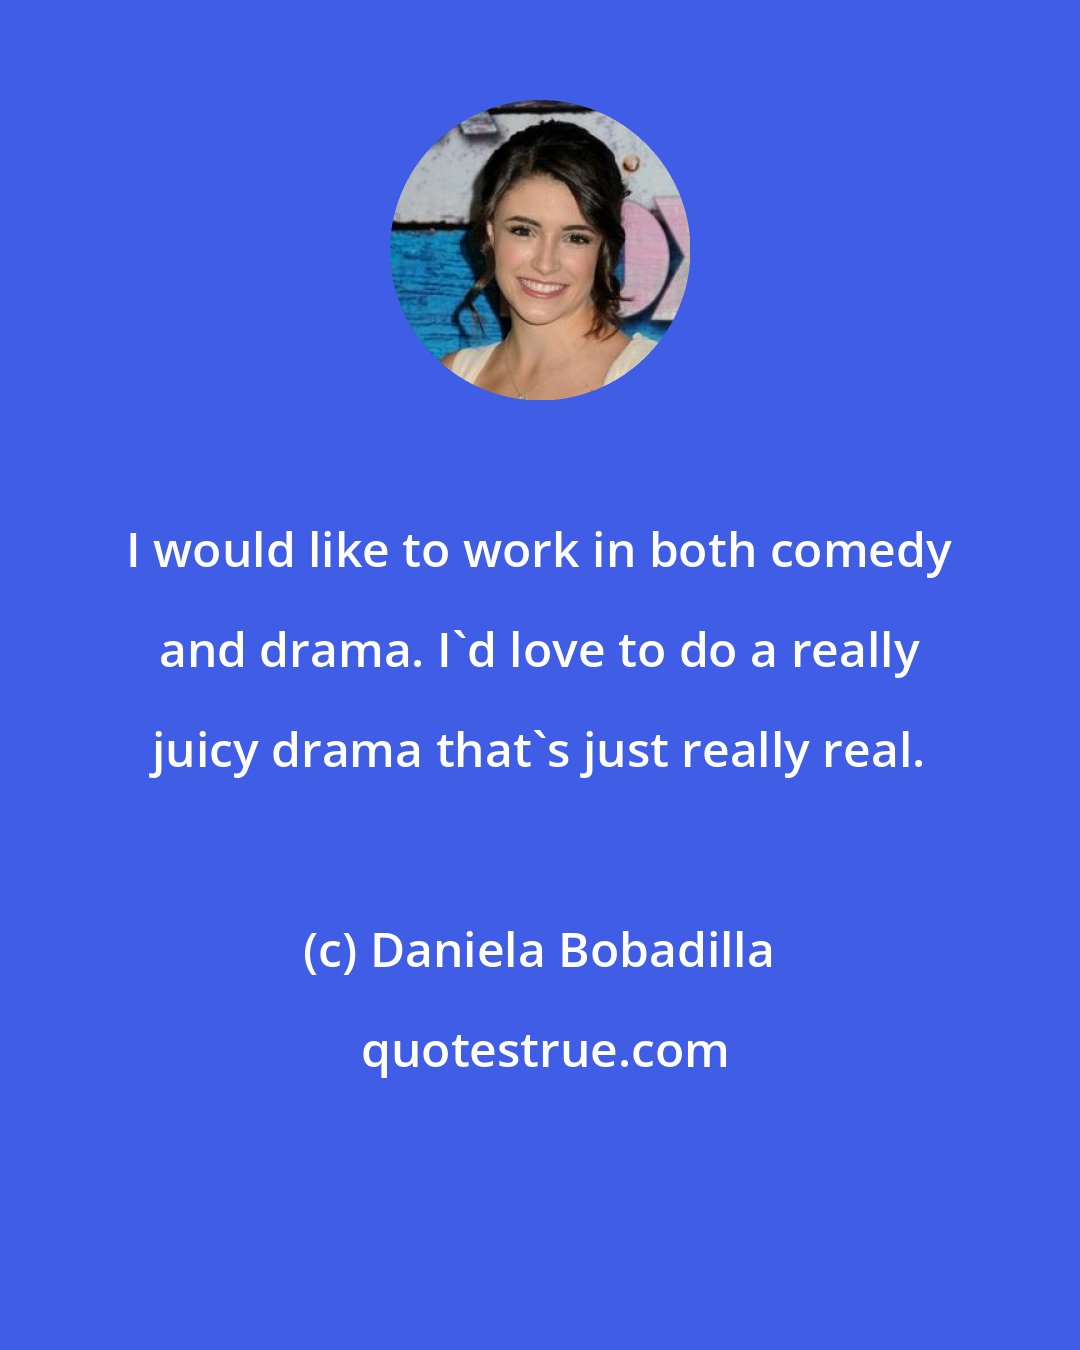 Daniela Bobadilla: I would like to work in both comedy and drama. I'd love to do a really juicy drama that's just really real.